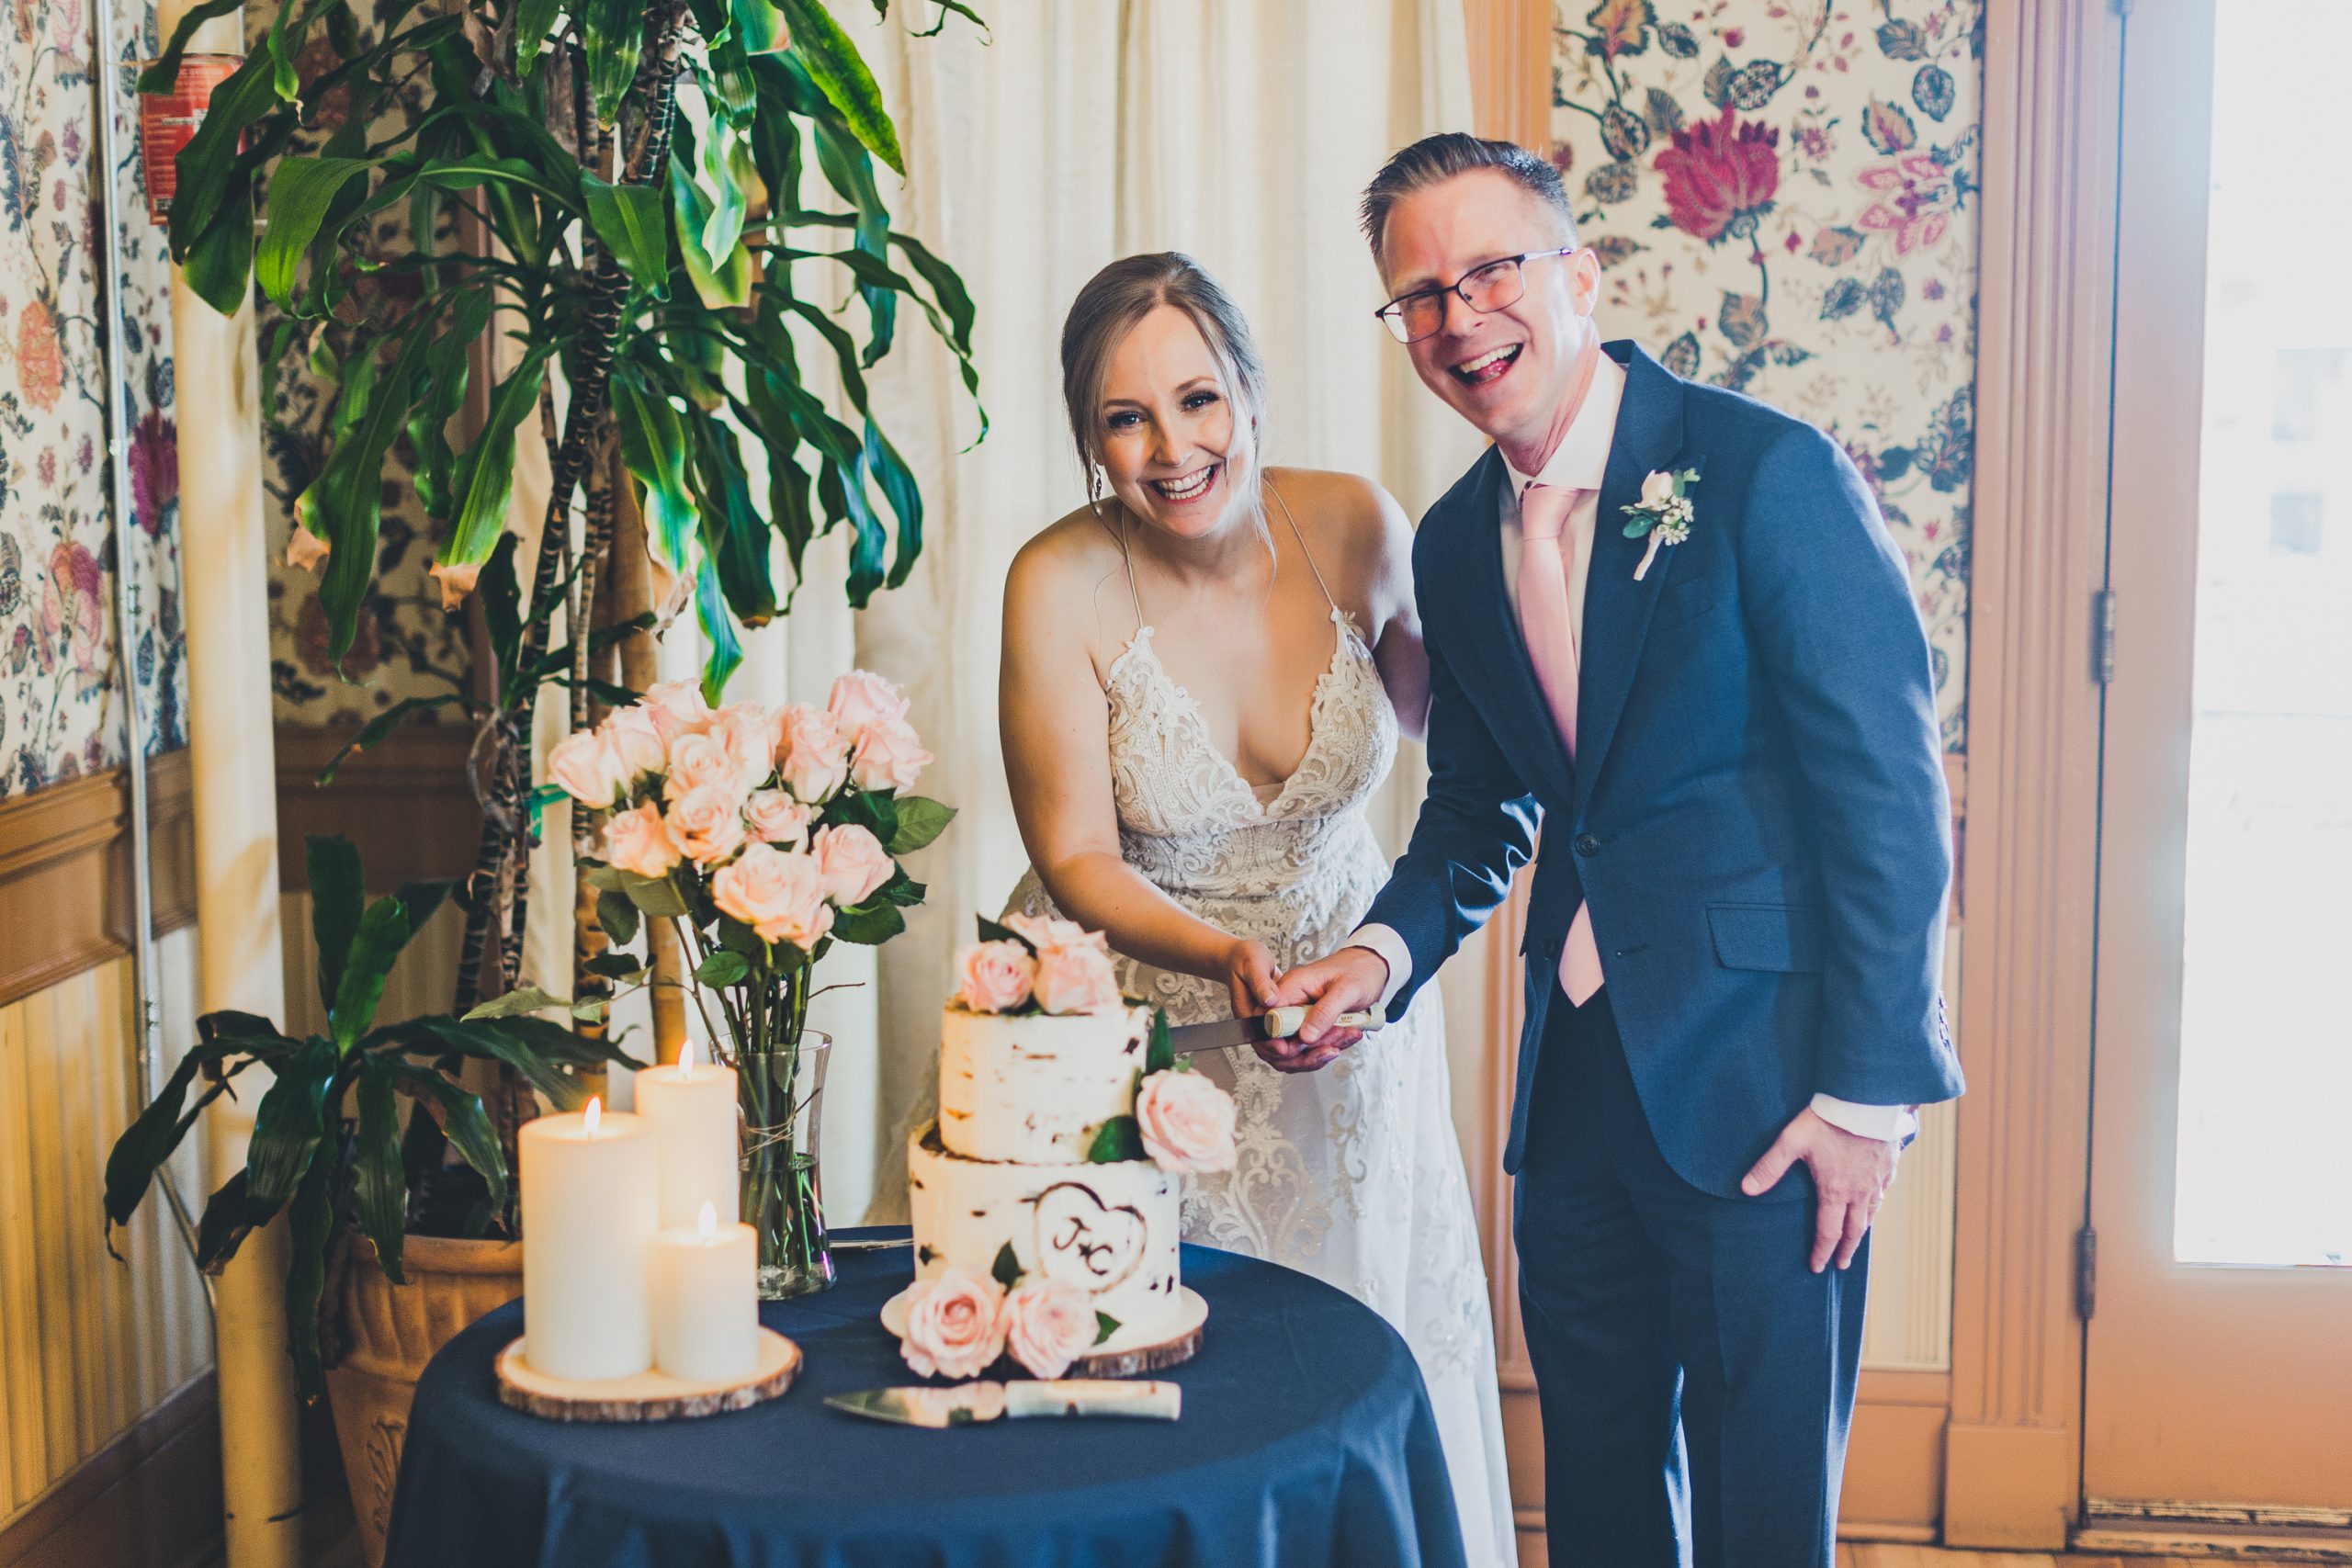 The oldest and most beautiful Flagstaff wedding venue right in the heart of downtown at the Weatherford Hotel in Flagstaff AZ | Have beautiful weddings at the Weatherford in Flagstaff Arizona | Weddings in Flagstaff | Flagstaff Weddings | Flagstaff Wedding Venue